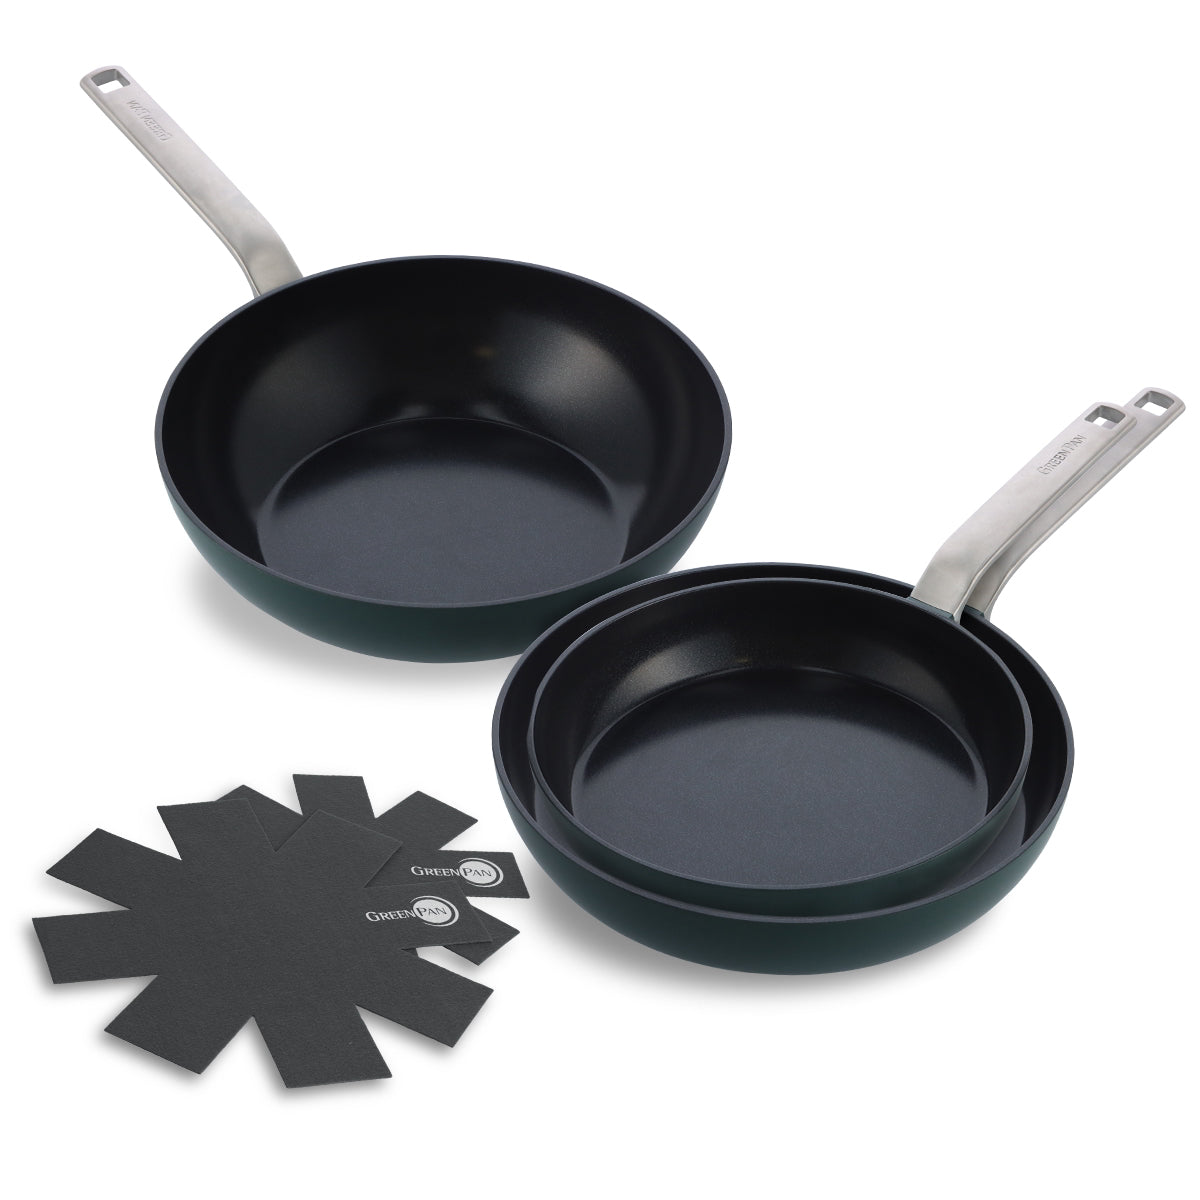 CC006393-001 - Evolution 3 pc Cookware Sets, Pine Green - Product Image 1